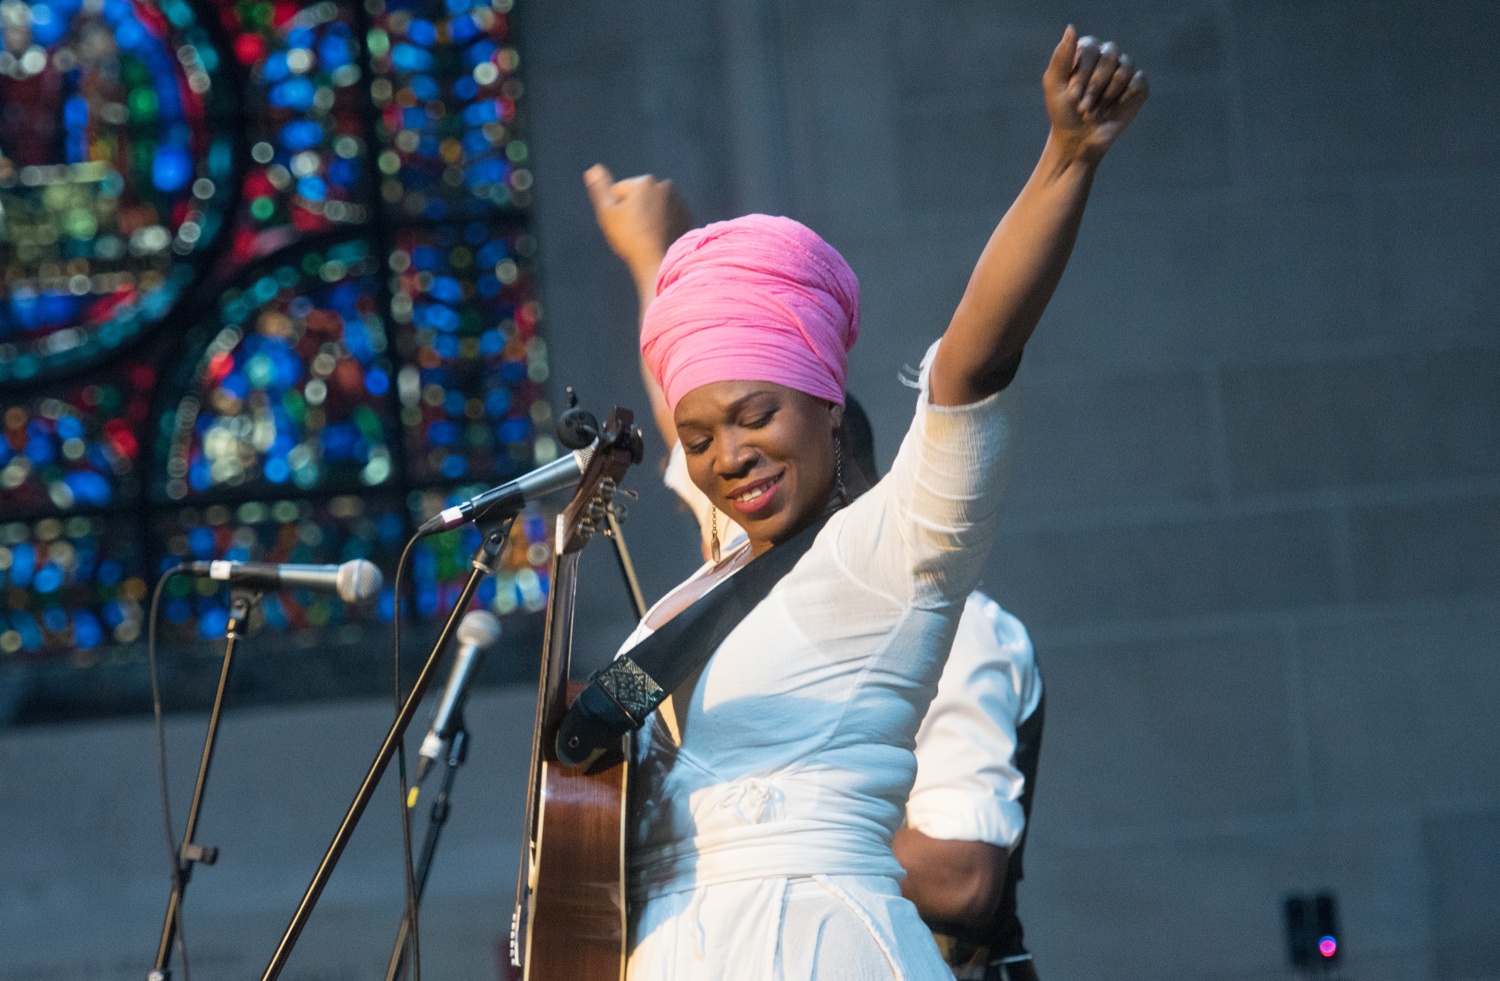 india arie ready for love movie soundtrack